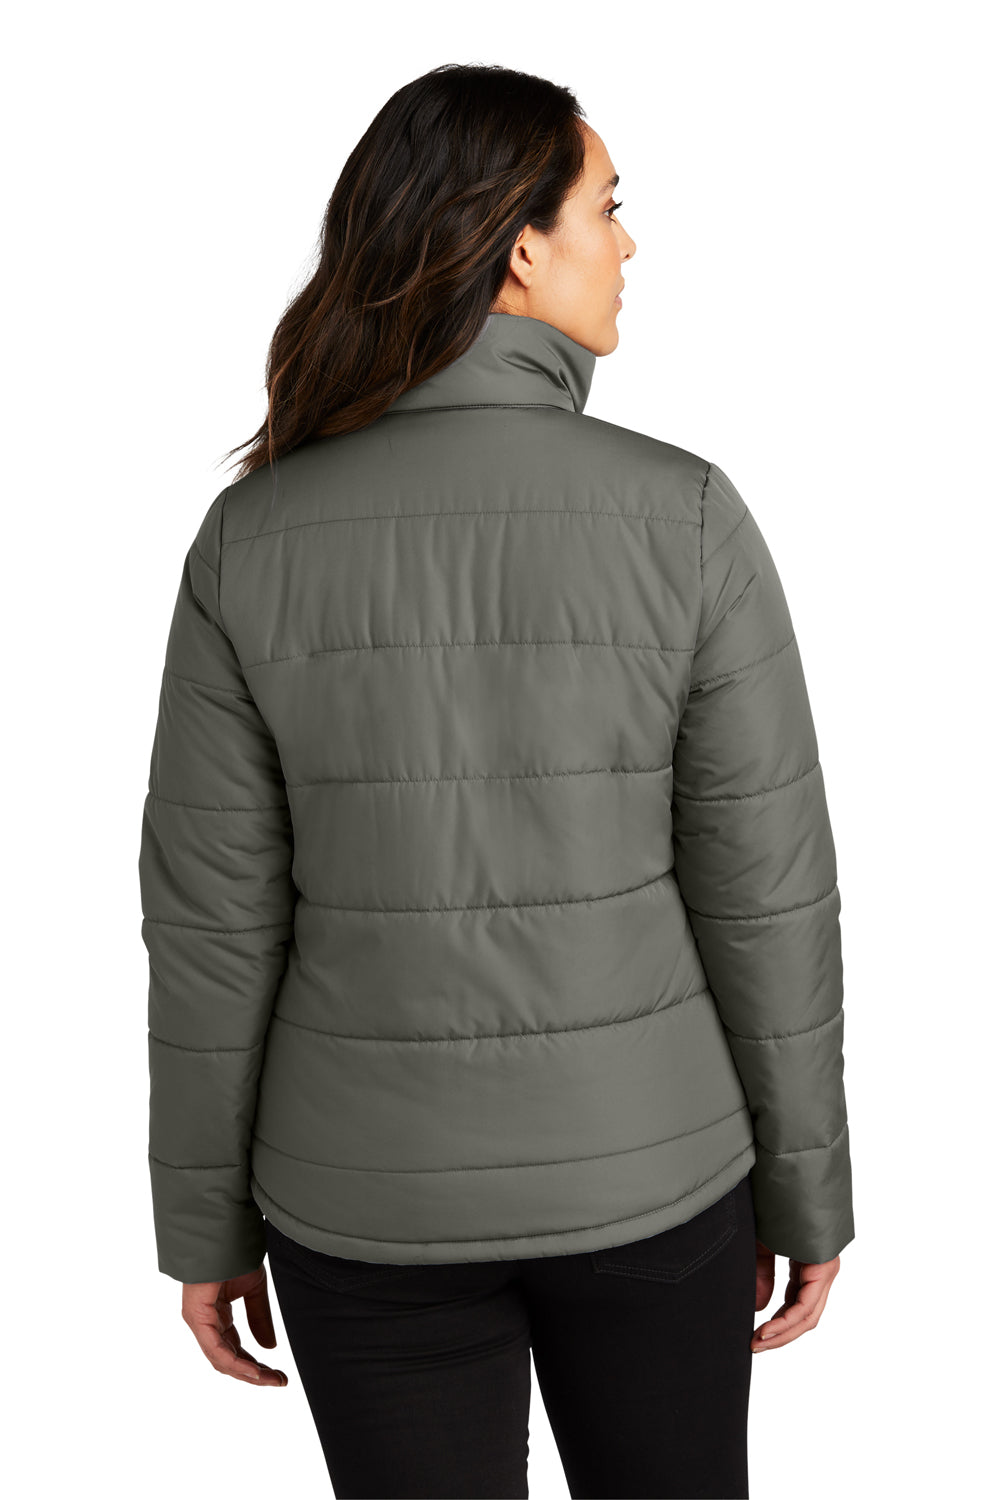 Port Authority L852 Womens Full Zip Puffer Jacket Shadow Grey Back